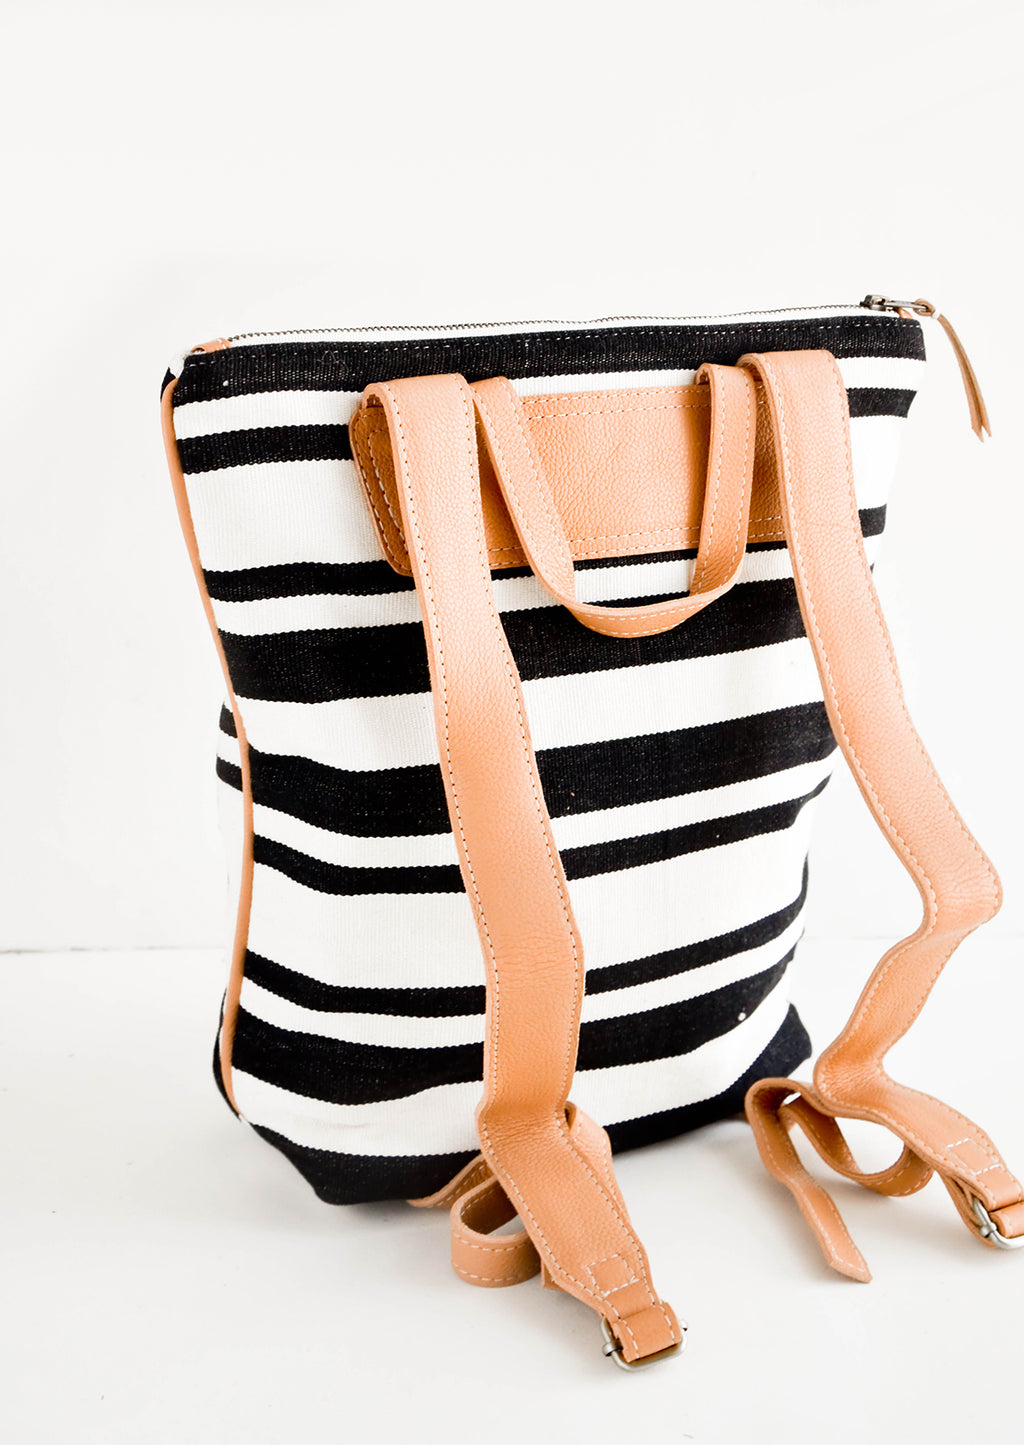 3: Tanned leather straps on the back of black & white striped canvas backpack